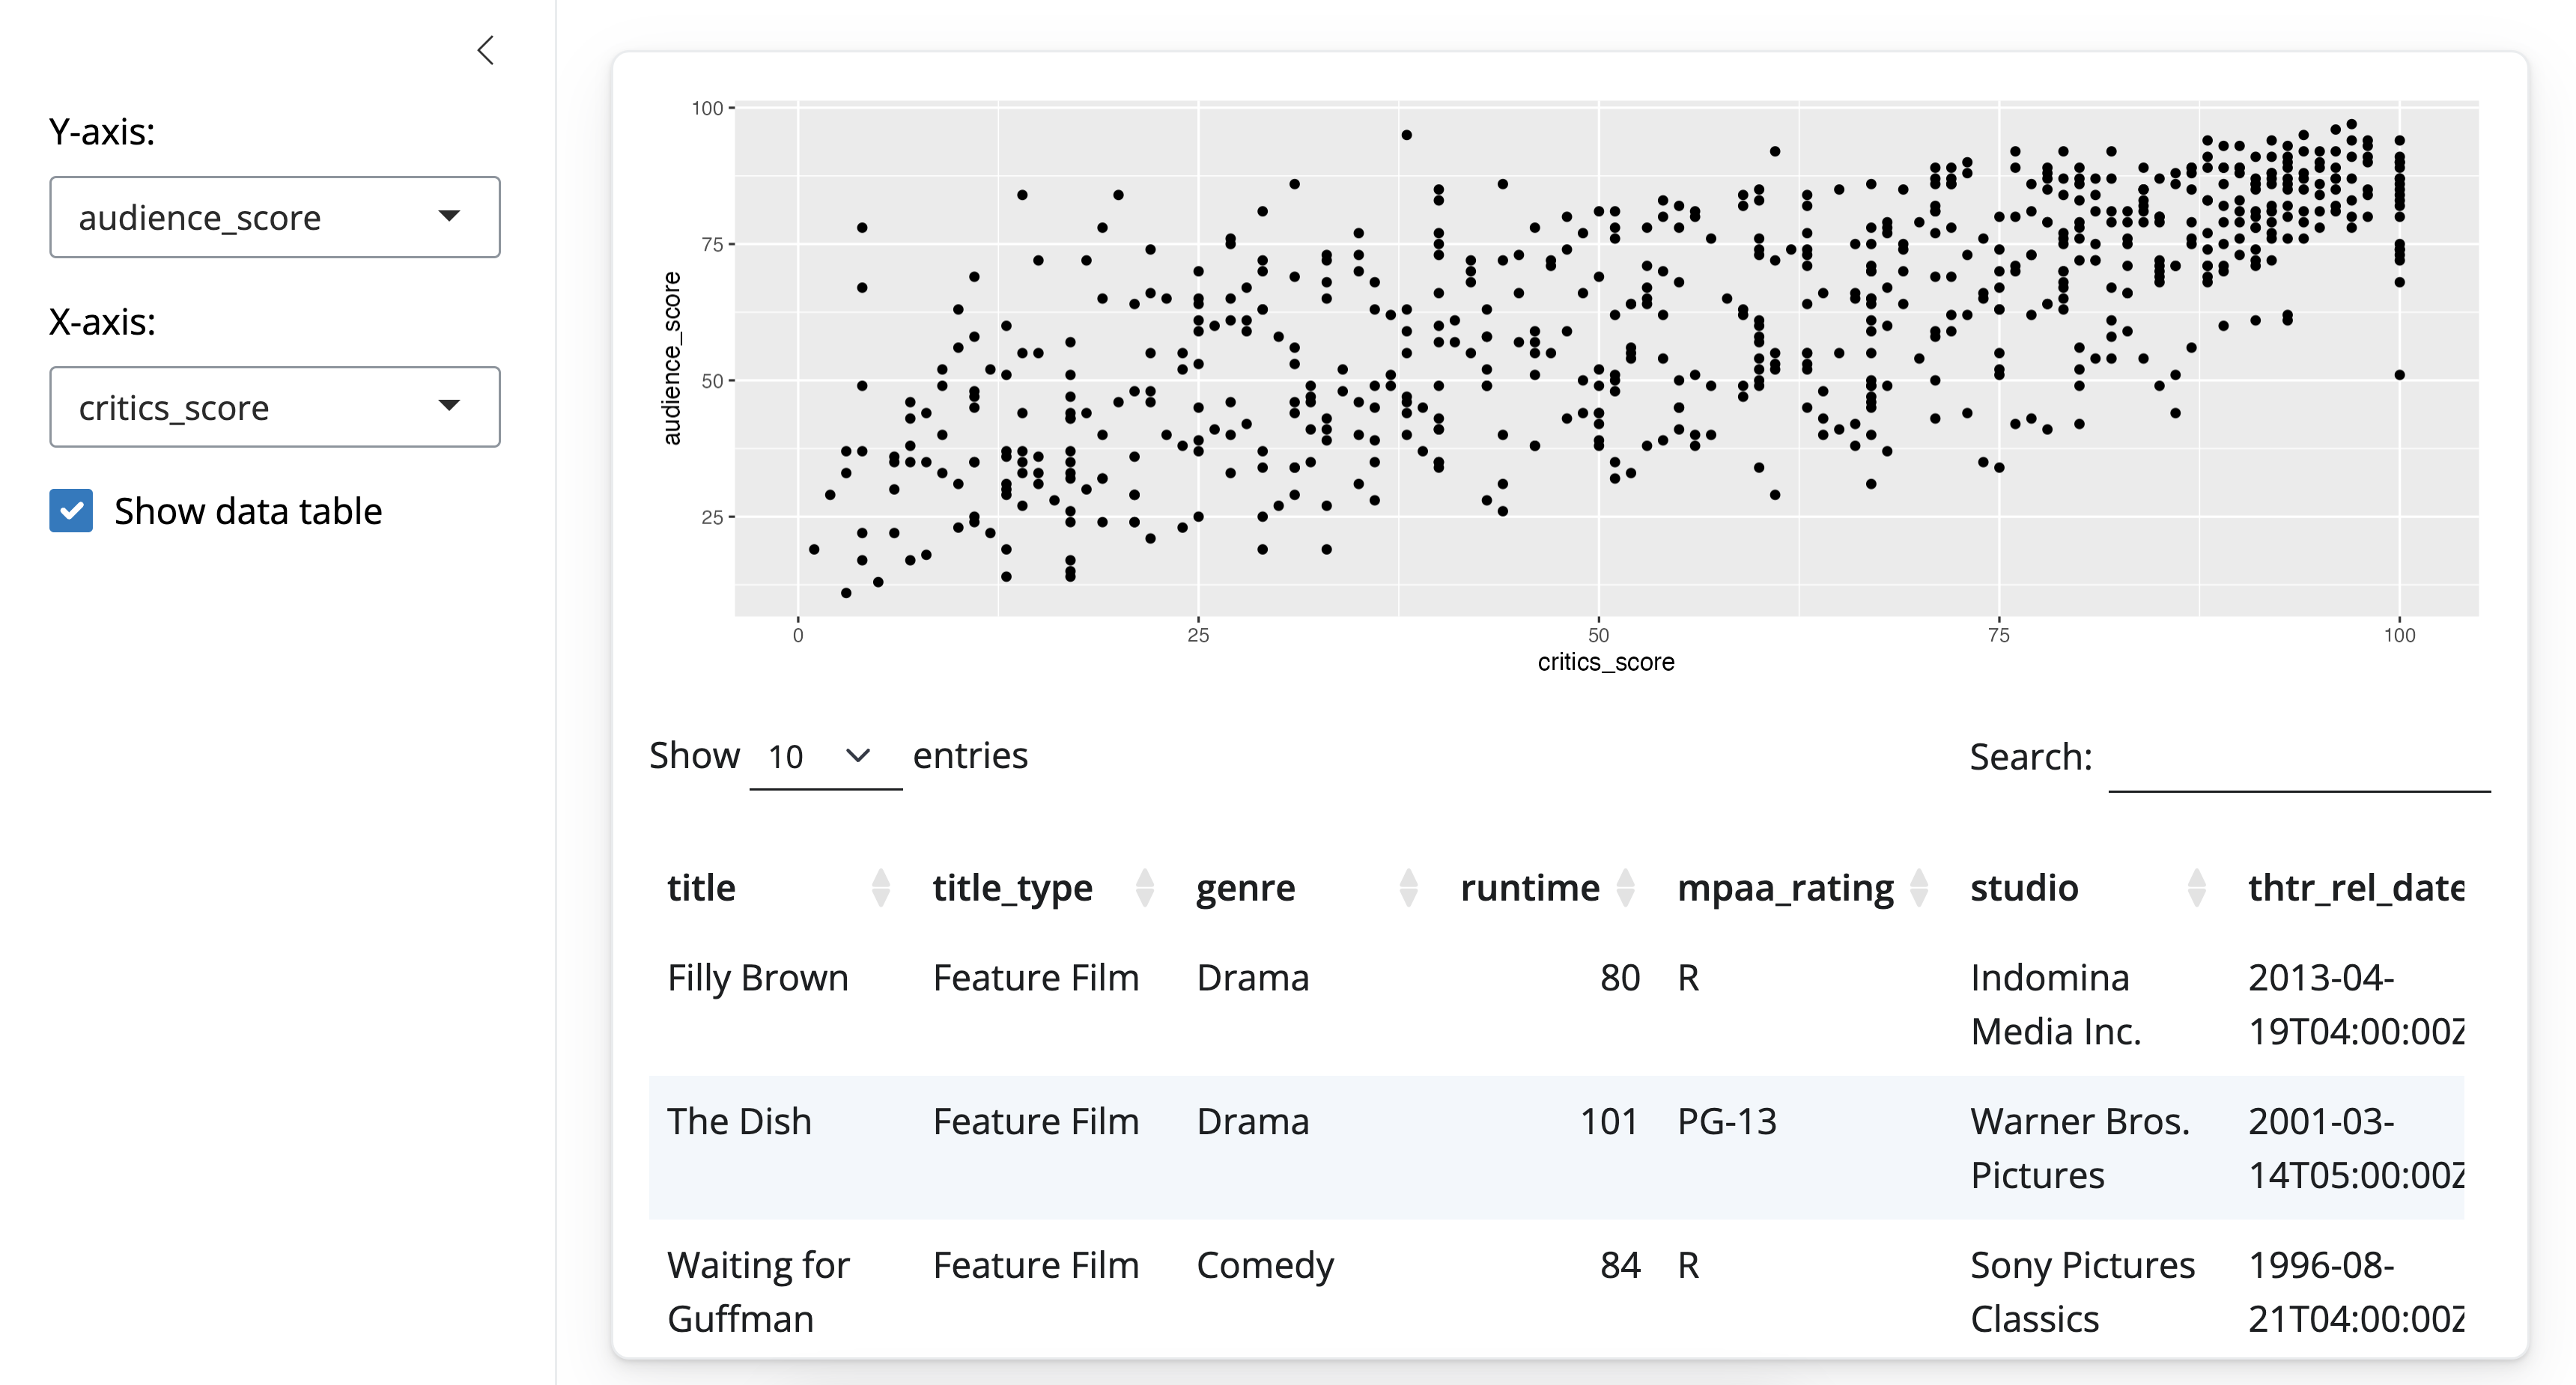 Our Shiny app, with a checkbox 'Show data table' added. The checkbox is checked. Below the plot is now a table with the columns title, title_type, genre, runtime, mpaa_rating, studio, and thtr_rel_date. Rows are for 5 movies - Filly Brown, The Dish, Waiting for Guffman, The Age of Innocence, Malevolence.